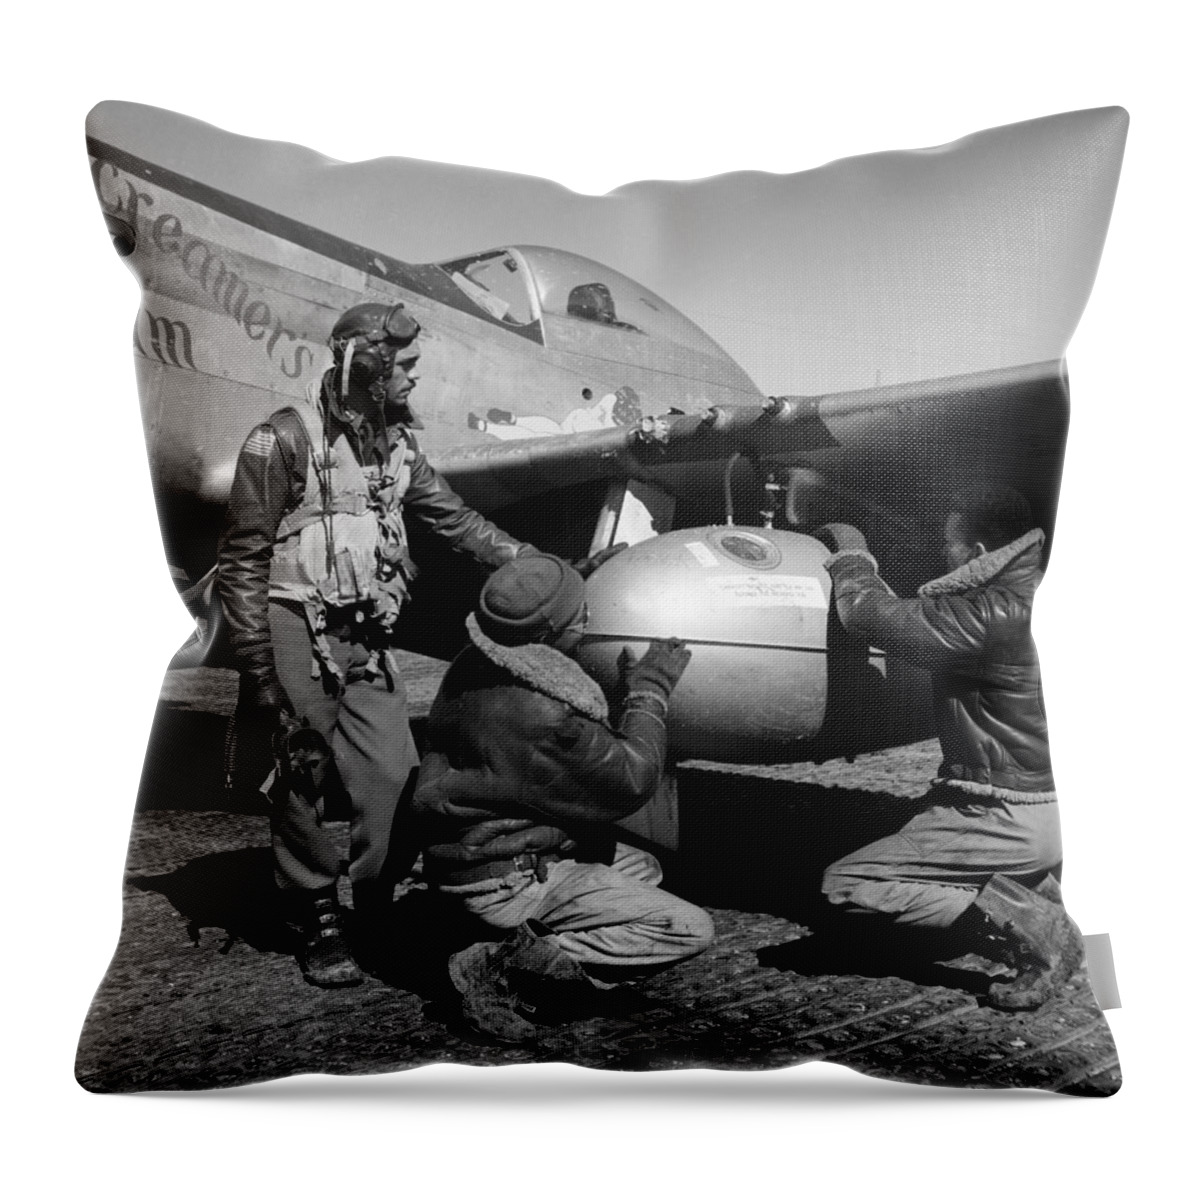 1945 Throw Pillow featuring the photograph Wwii: Tuskegee Airmen, 1945 #3 by Granger